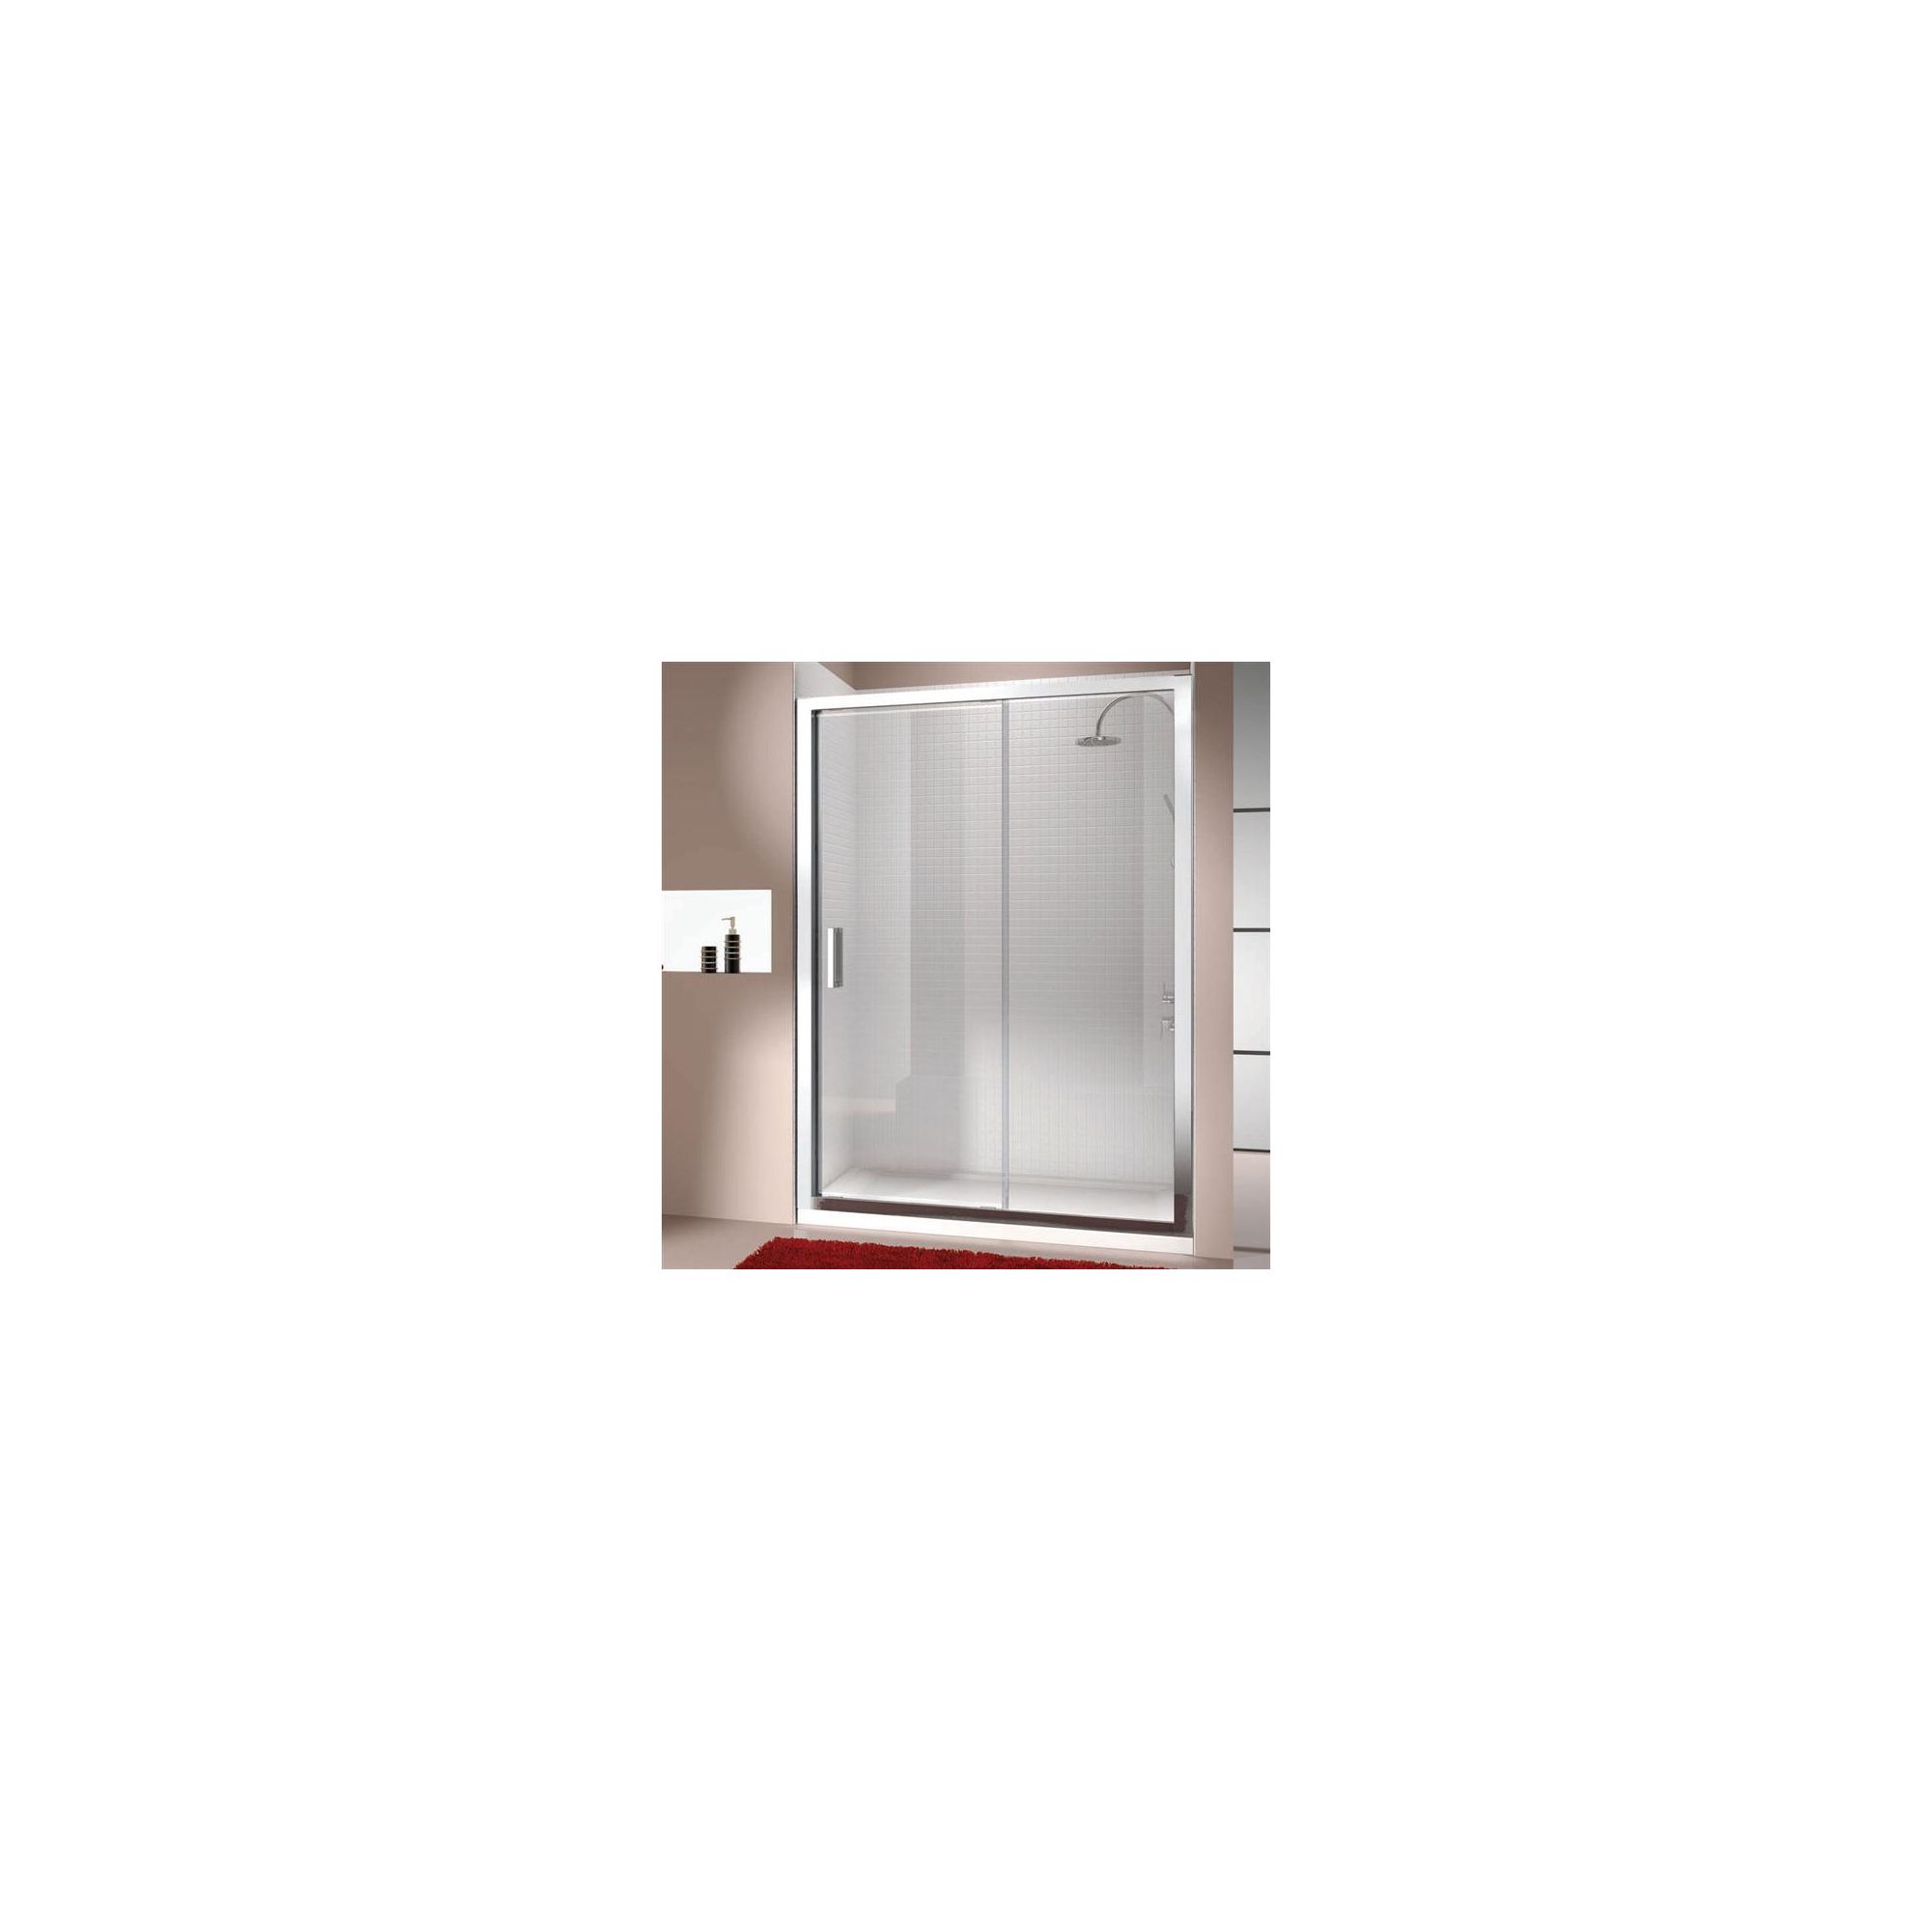 Merlyn Vivid Eight Sliding Door Alcove Shower Enclosure, 1500mm x 800mm, Low Profile Tray, 8mm Glass at Tesco Direct